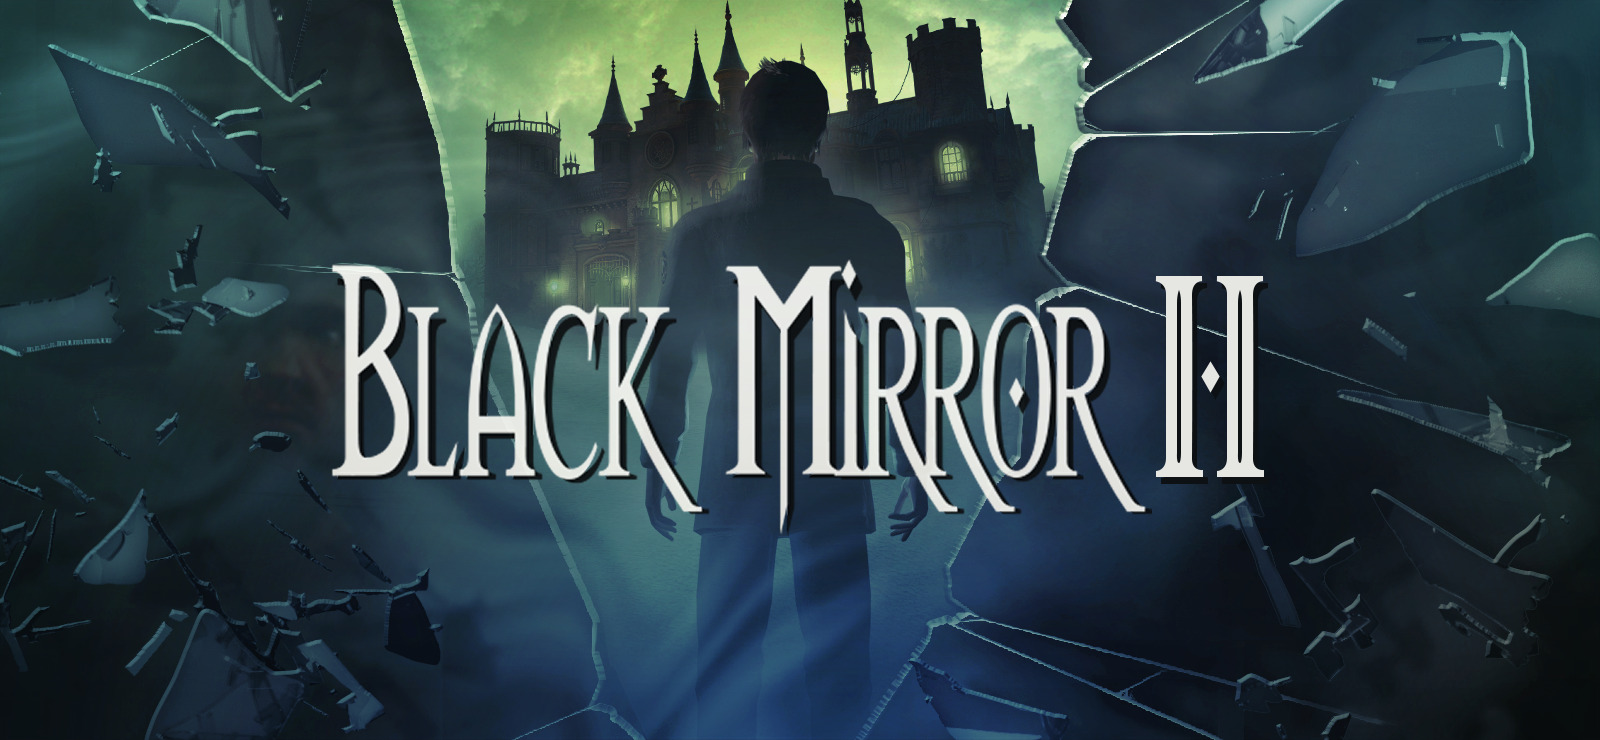 The Black Mirror 2 #022 #gameplay #game #quest